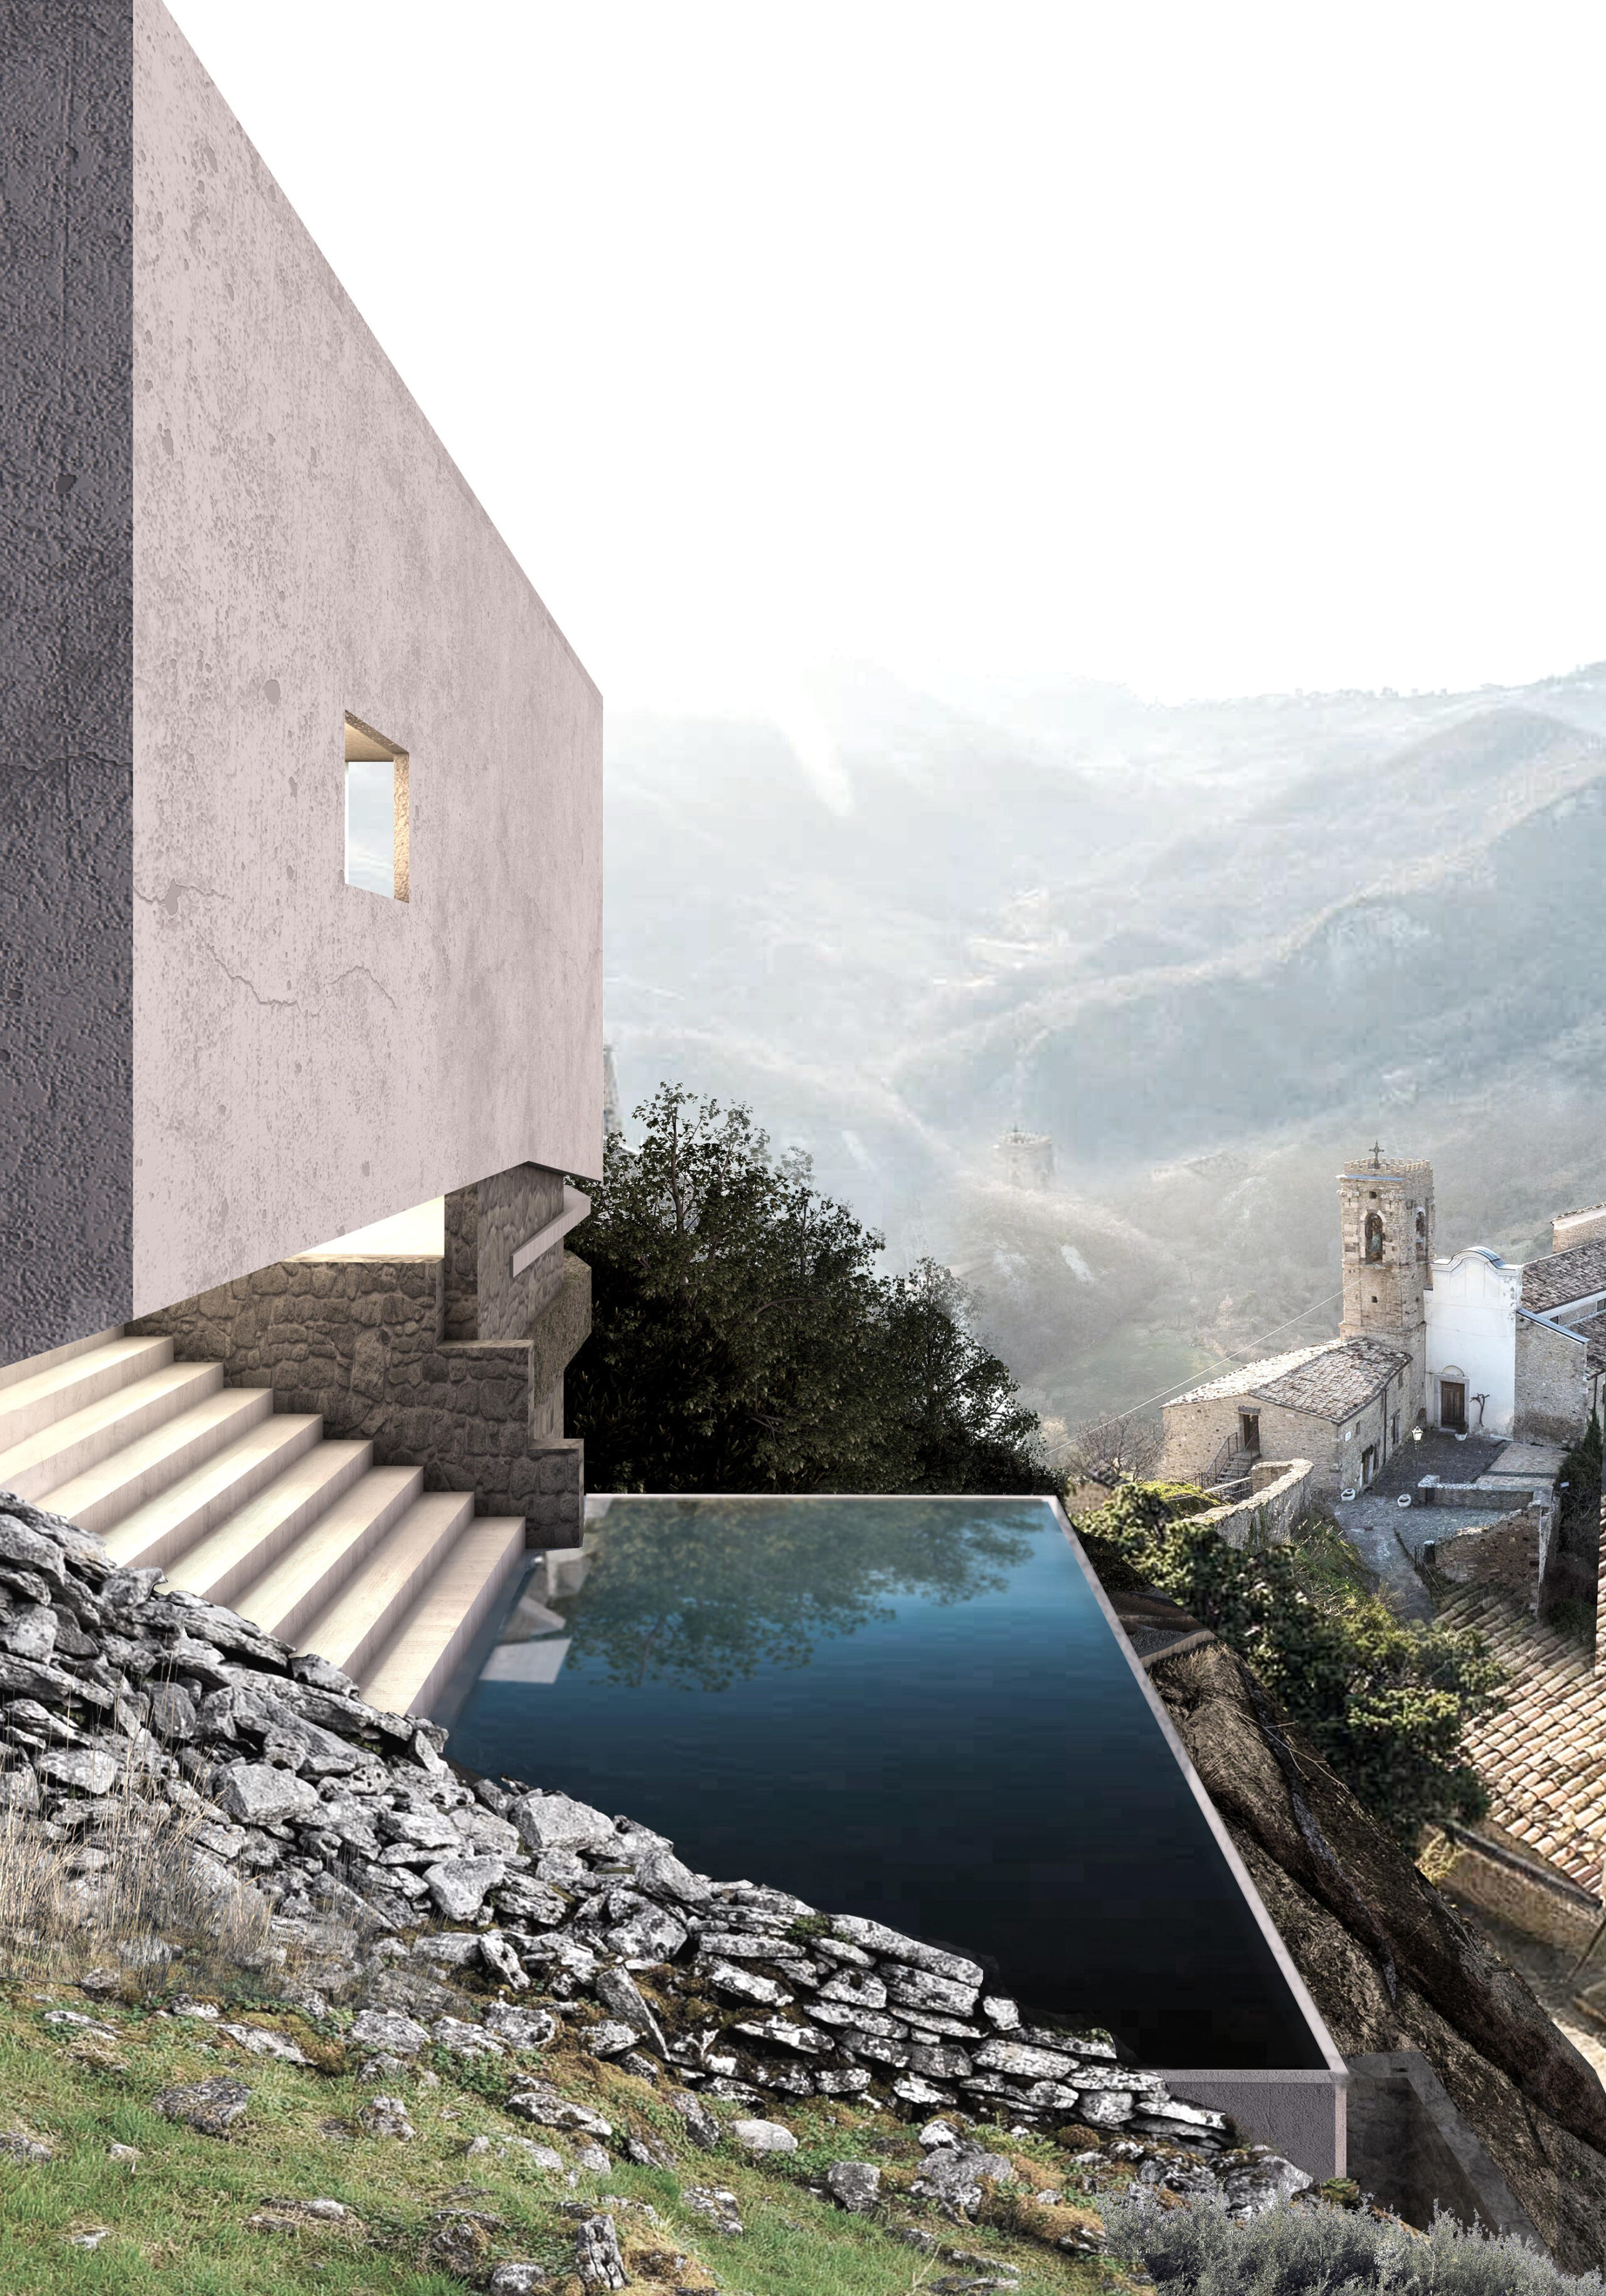 Infinity pool render in Italy by YMAGES. Architect visualization and design.